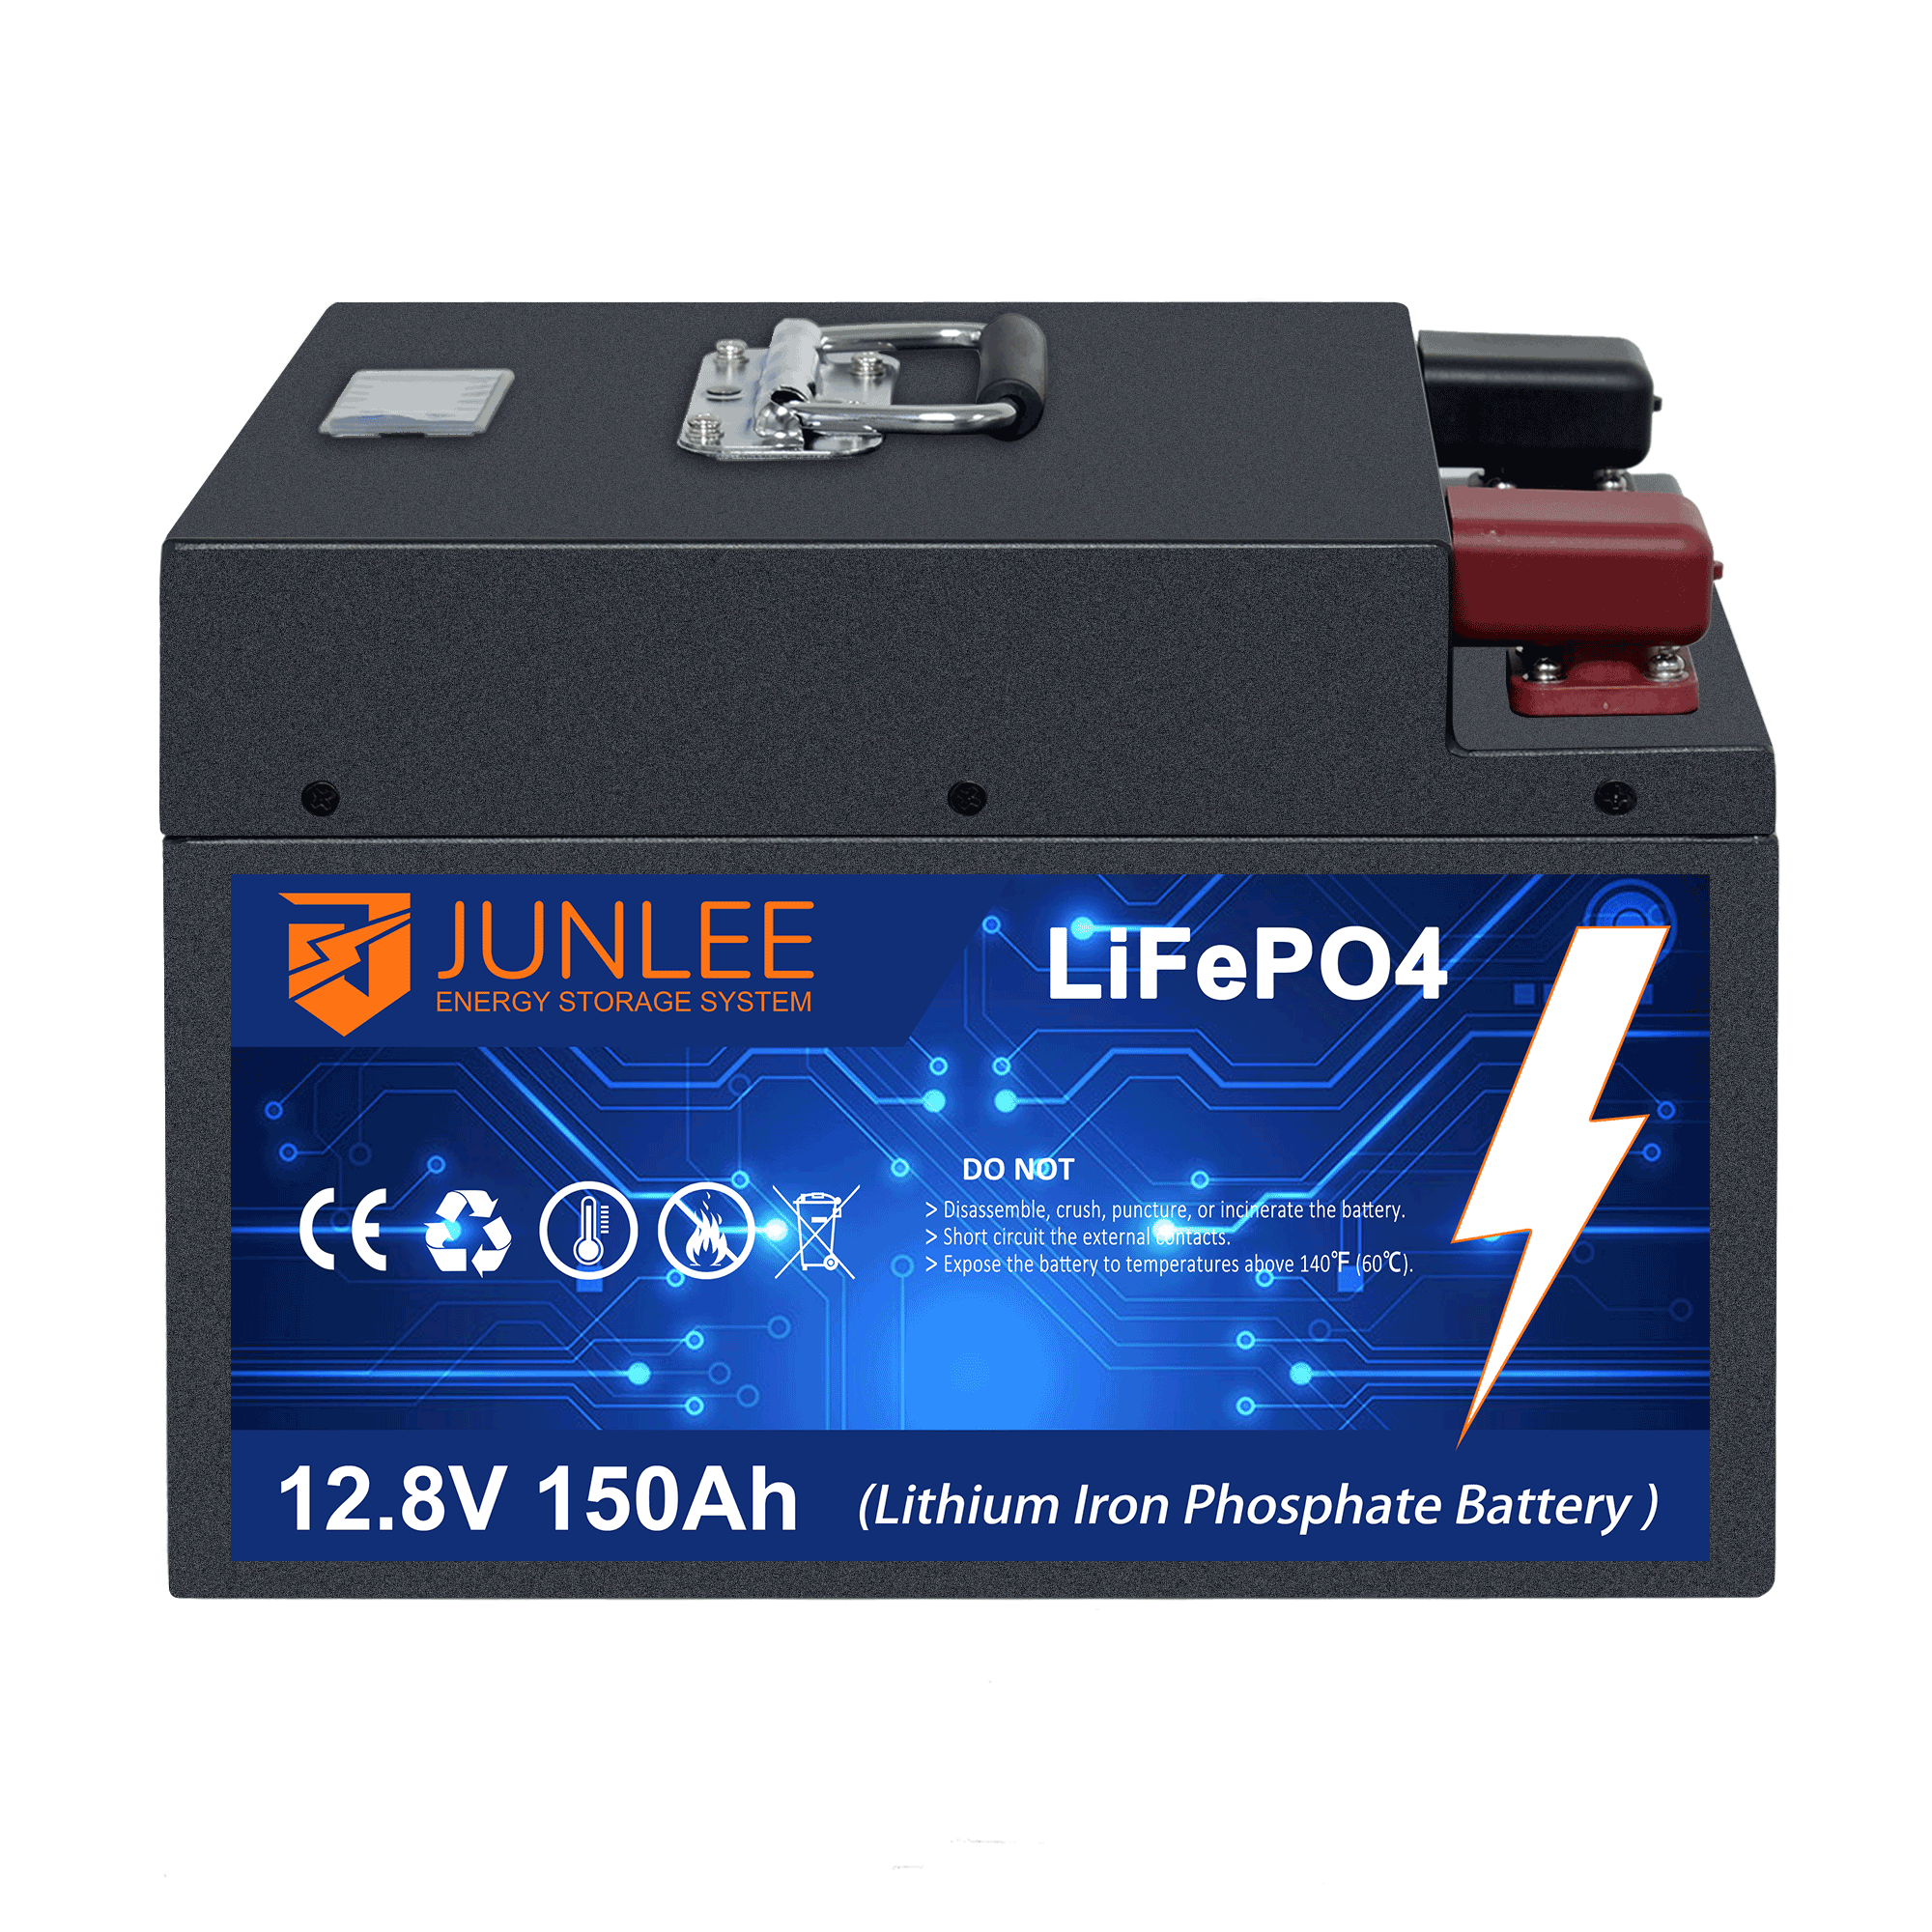 LFP(LiFePo4) Battery 24V 150Ah Lithium Battery 26650 Pack With ABS Case